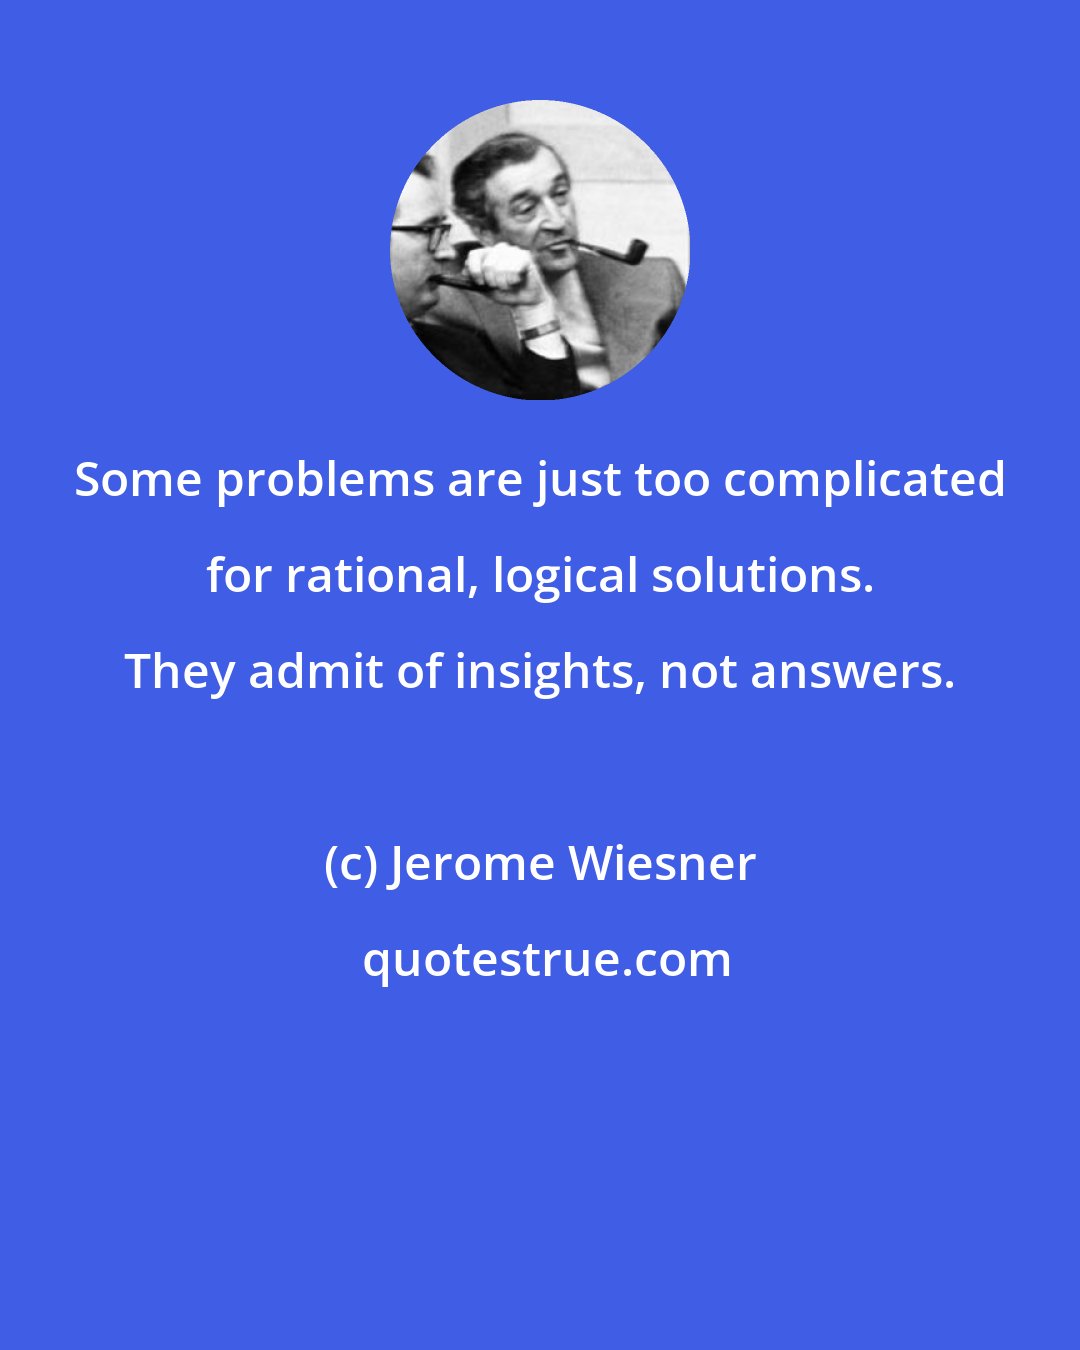 Jerome Wiesner: Some problems are just too complicated for rational, logical solutions. They admit of insights, not answers.